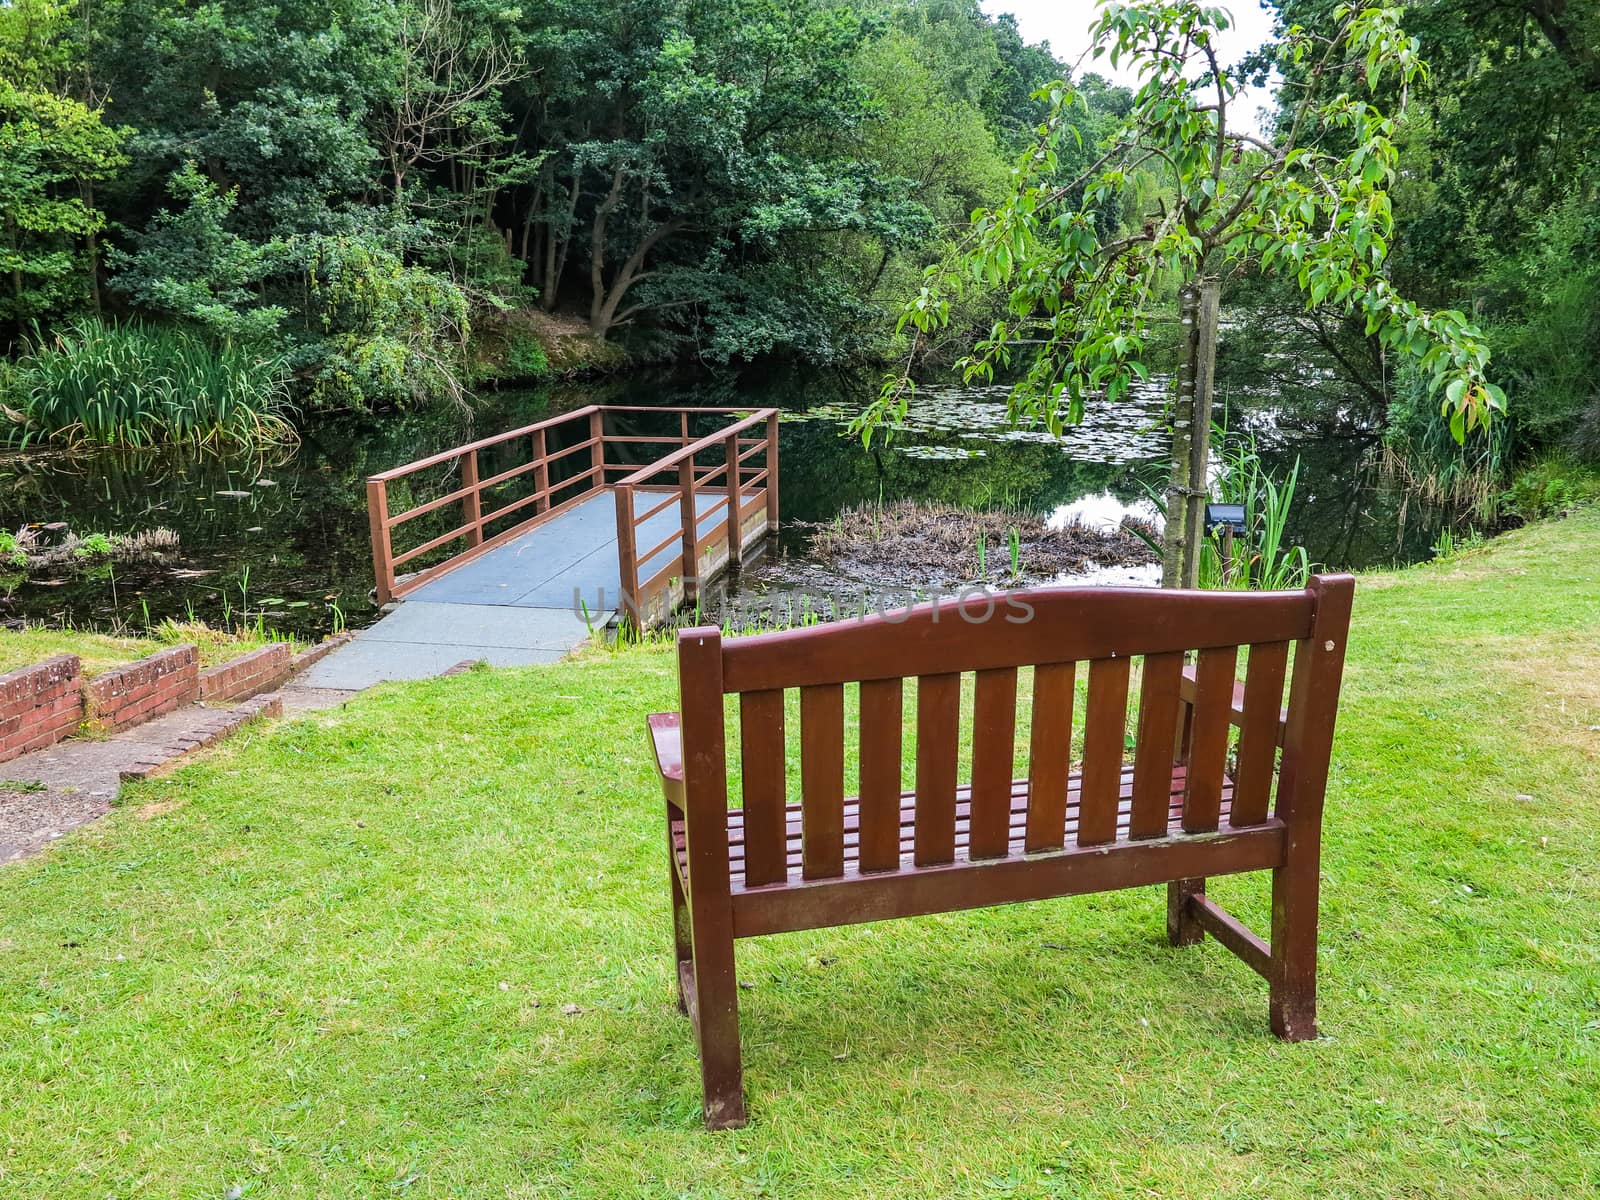 An empty wooden bench overlooking a pond in the UK